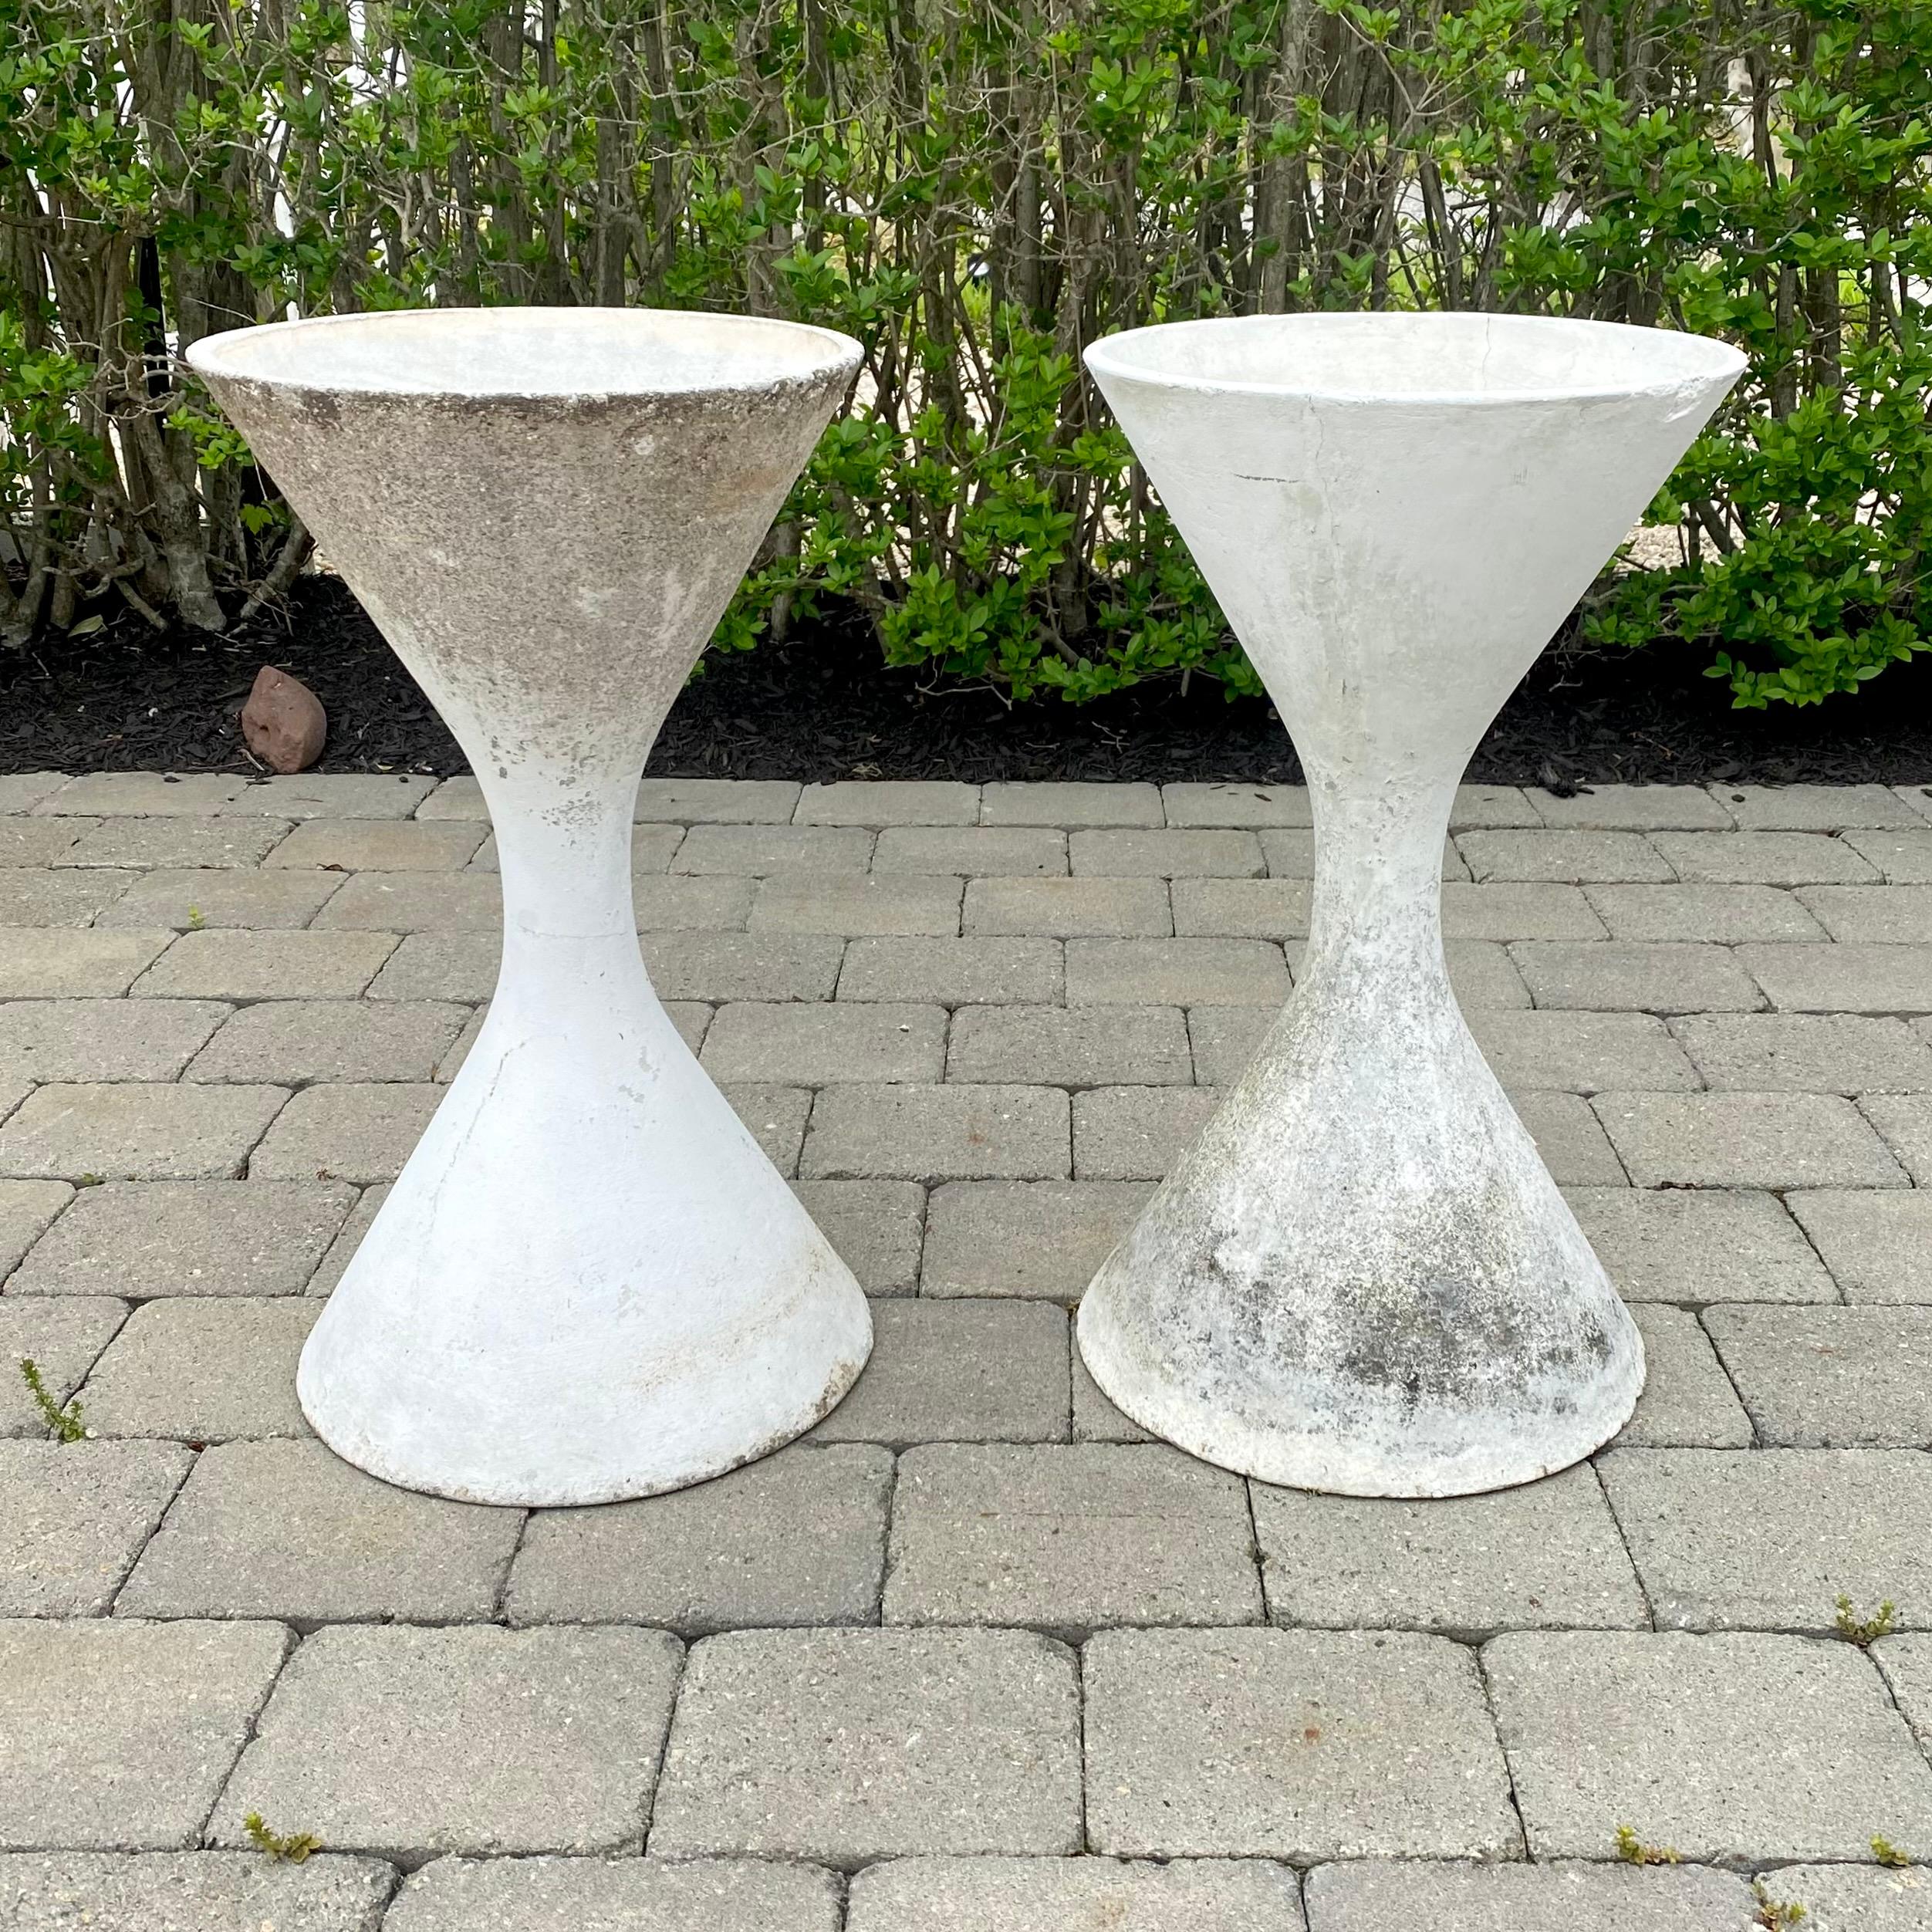 Classic white 'Diablo' hourglass planters by Swiss designer Willy Guhl for Eternit. Gorgeous gradient patina to white paint revealing the mottled cement beneath. Excellent vintage condition. Multiple other hourglass planters in various colors and